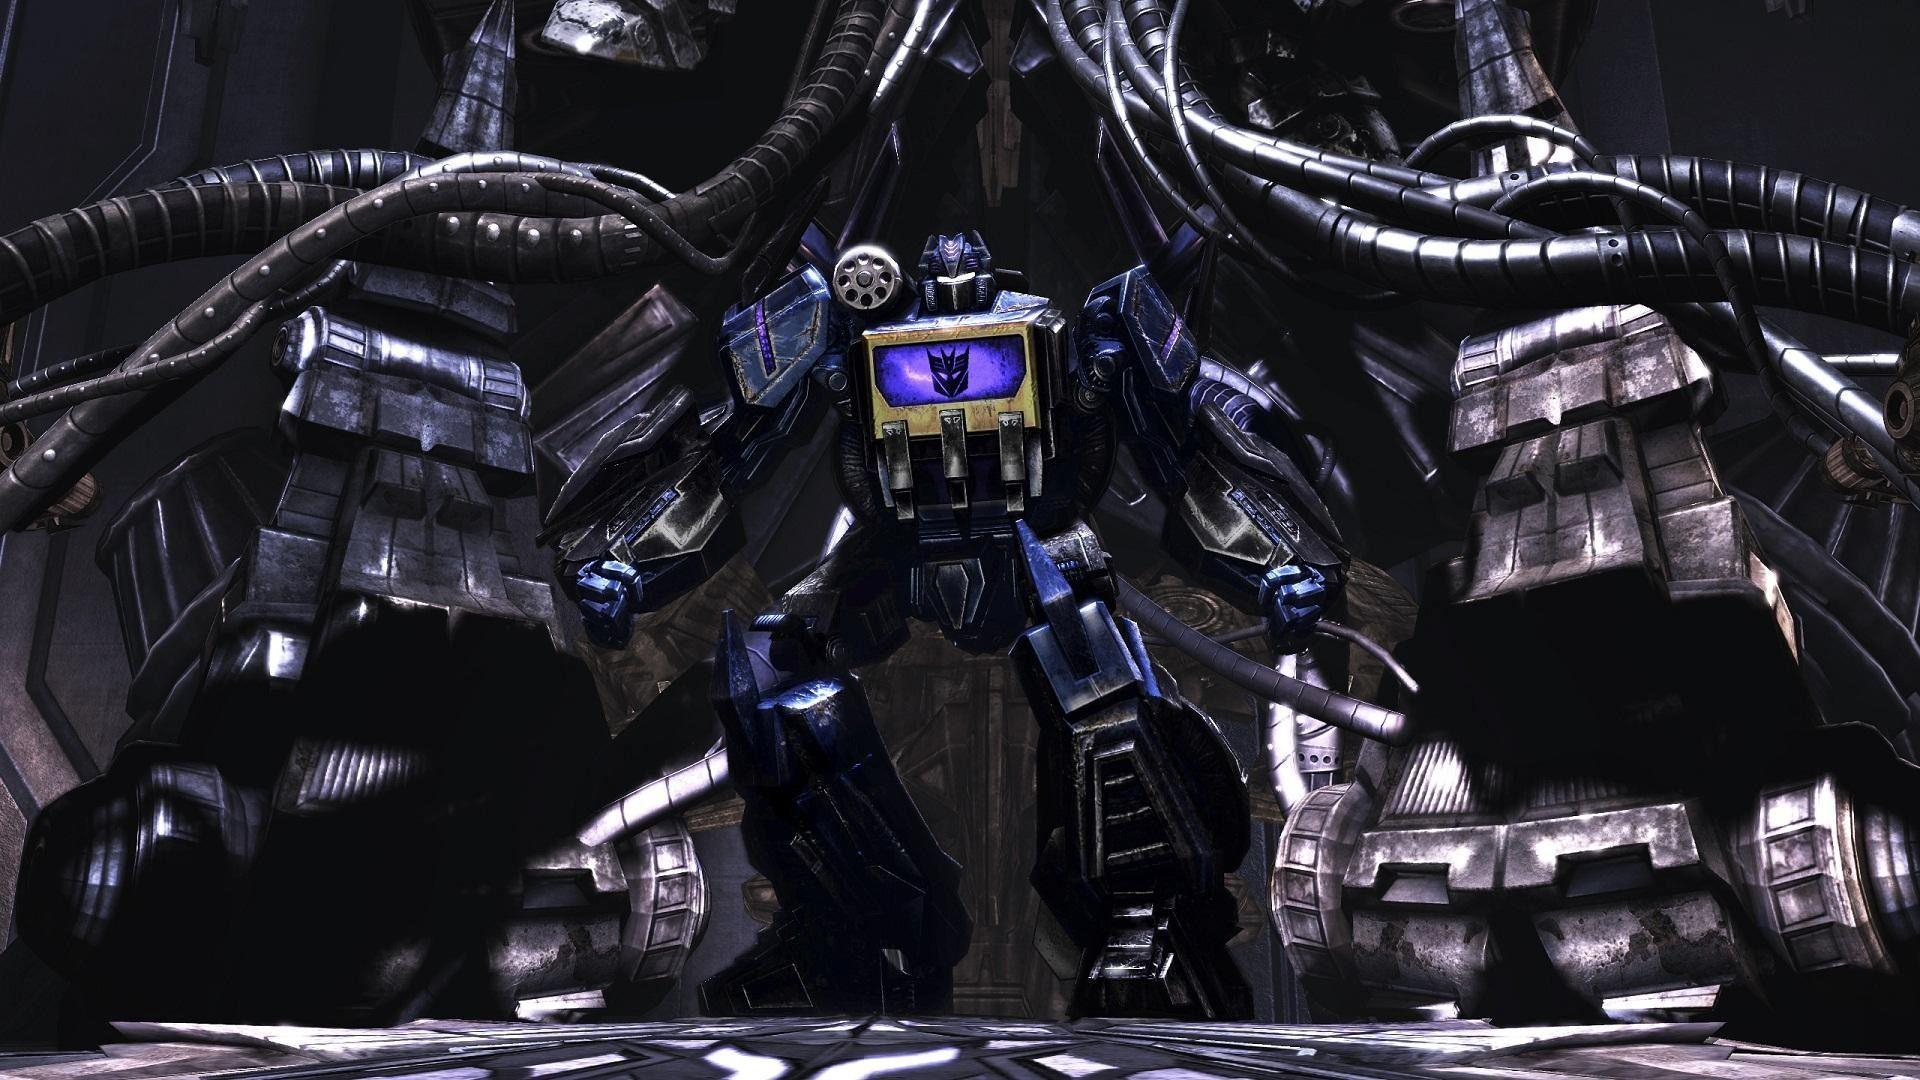 1920x1080 Transformers Soundwave Wallpapers Top Free Transformers Soundwave Backgrounds